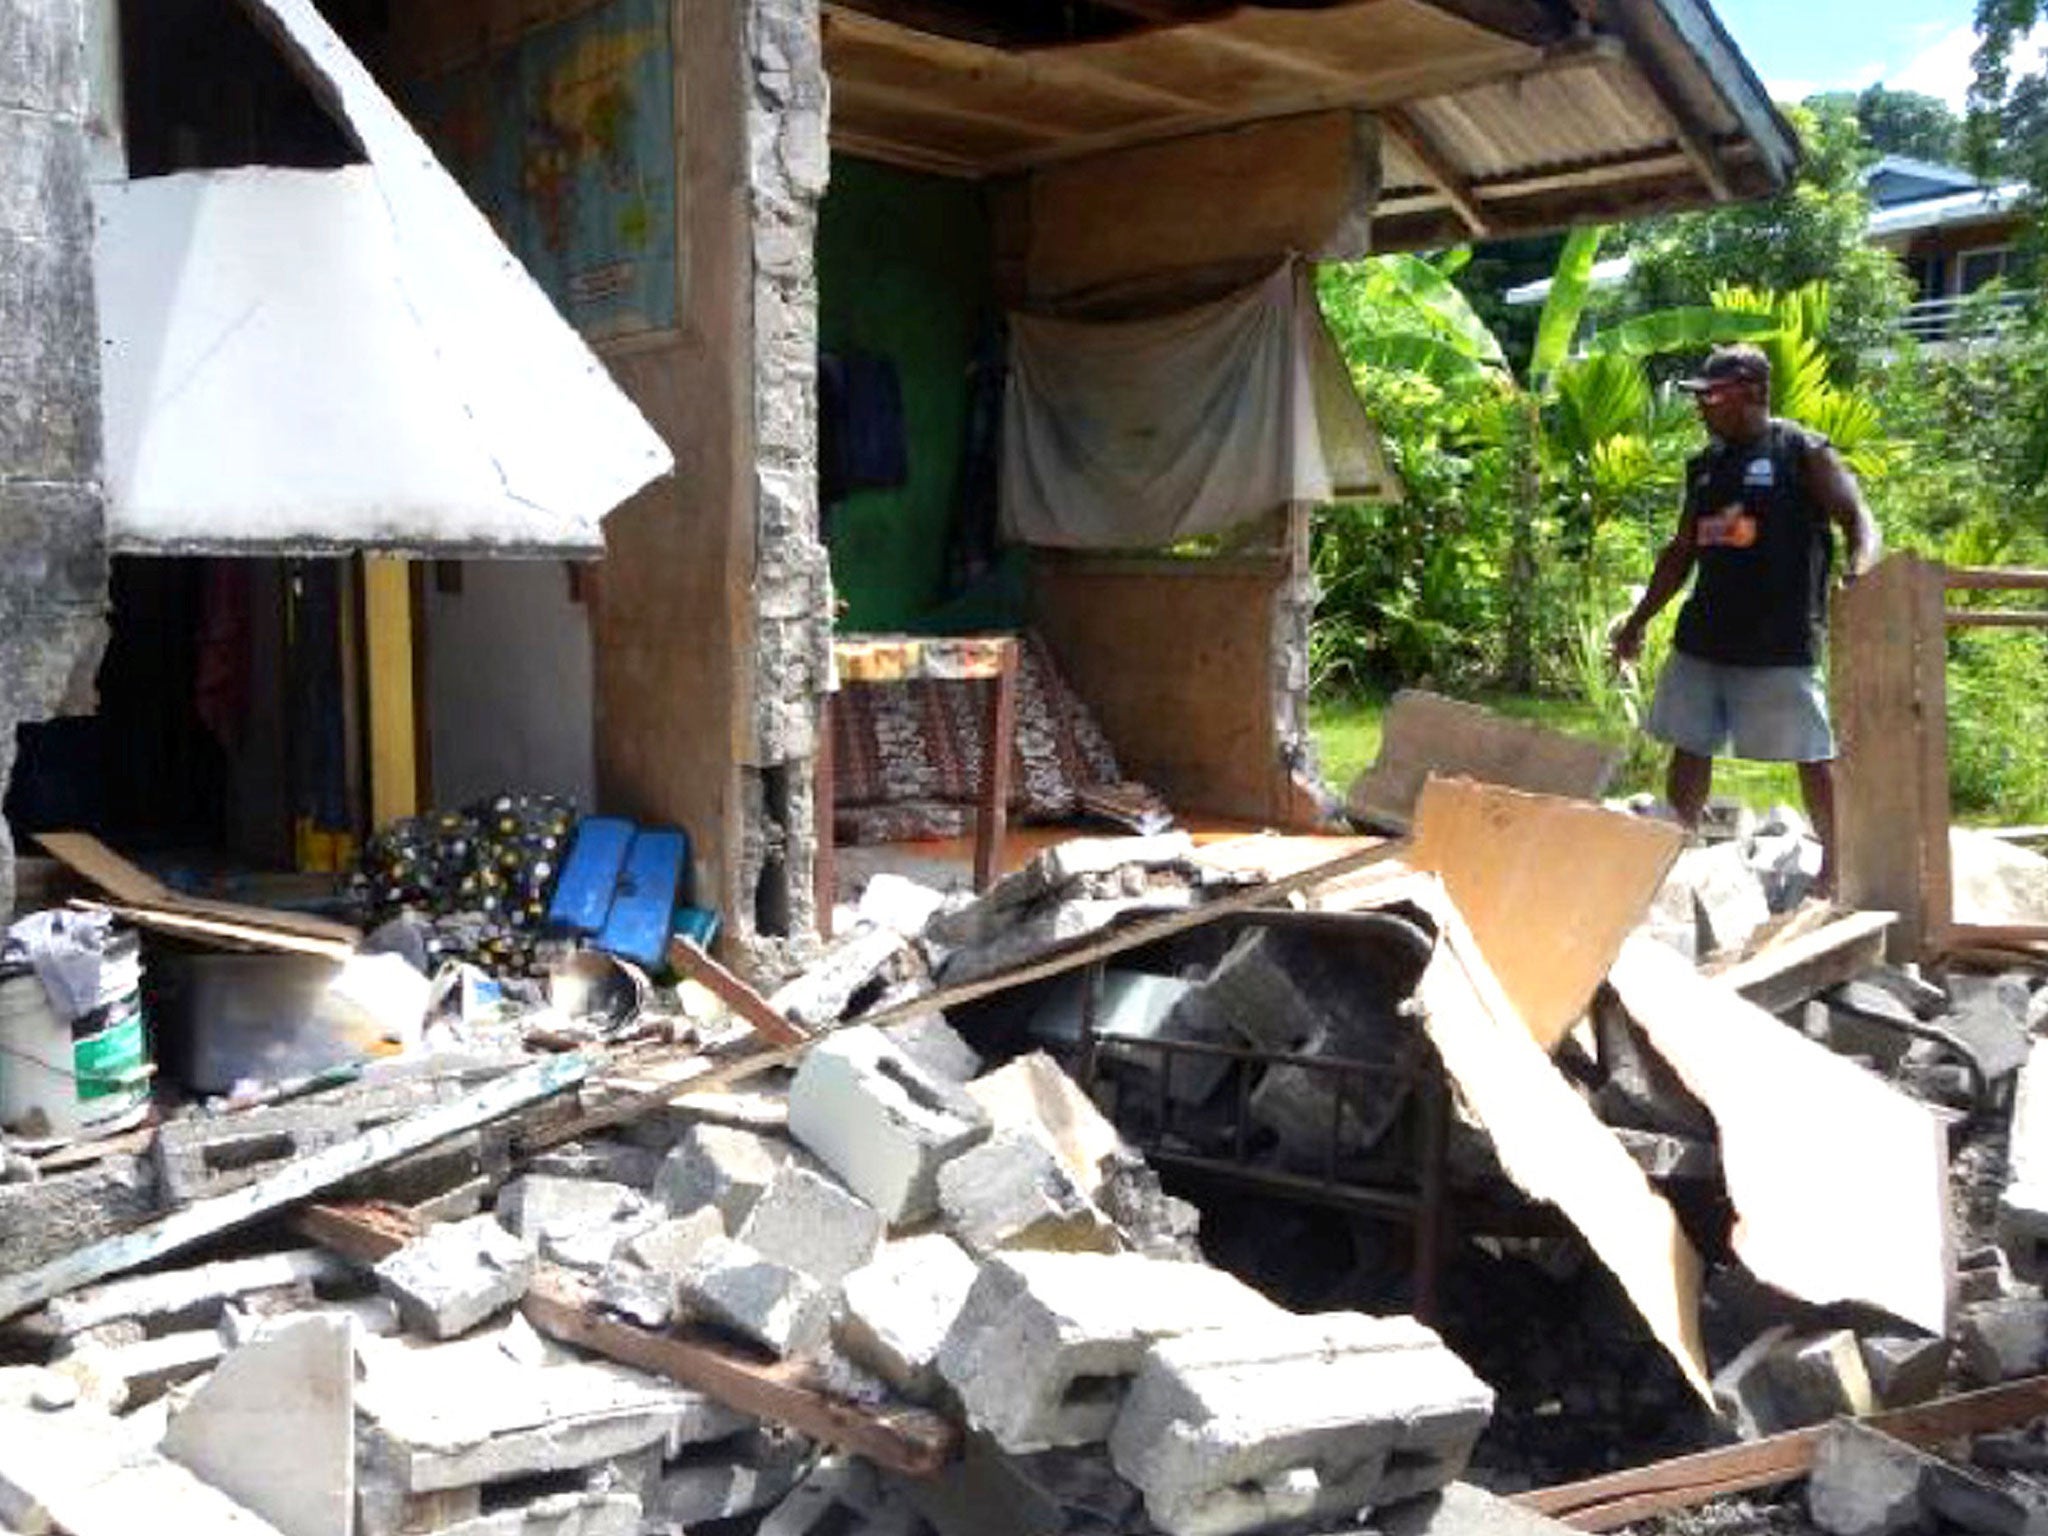 The Solomon Islands were still recovering from an earthquake that caused damage the previous day